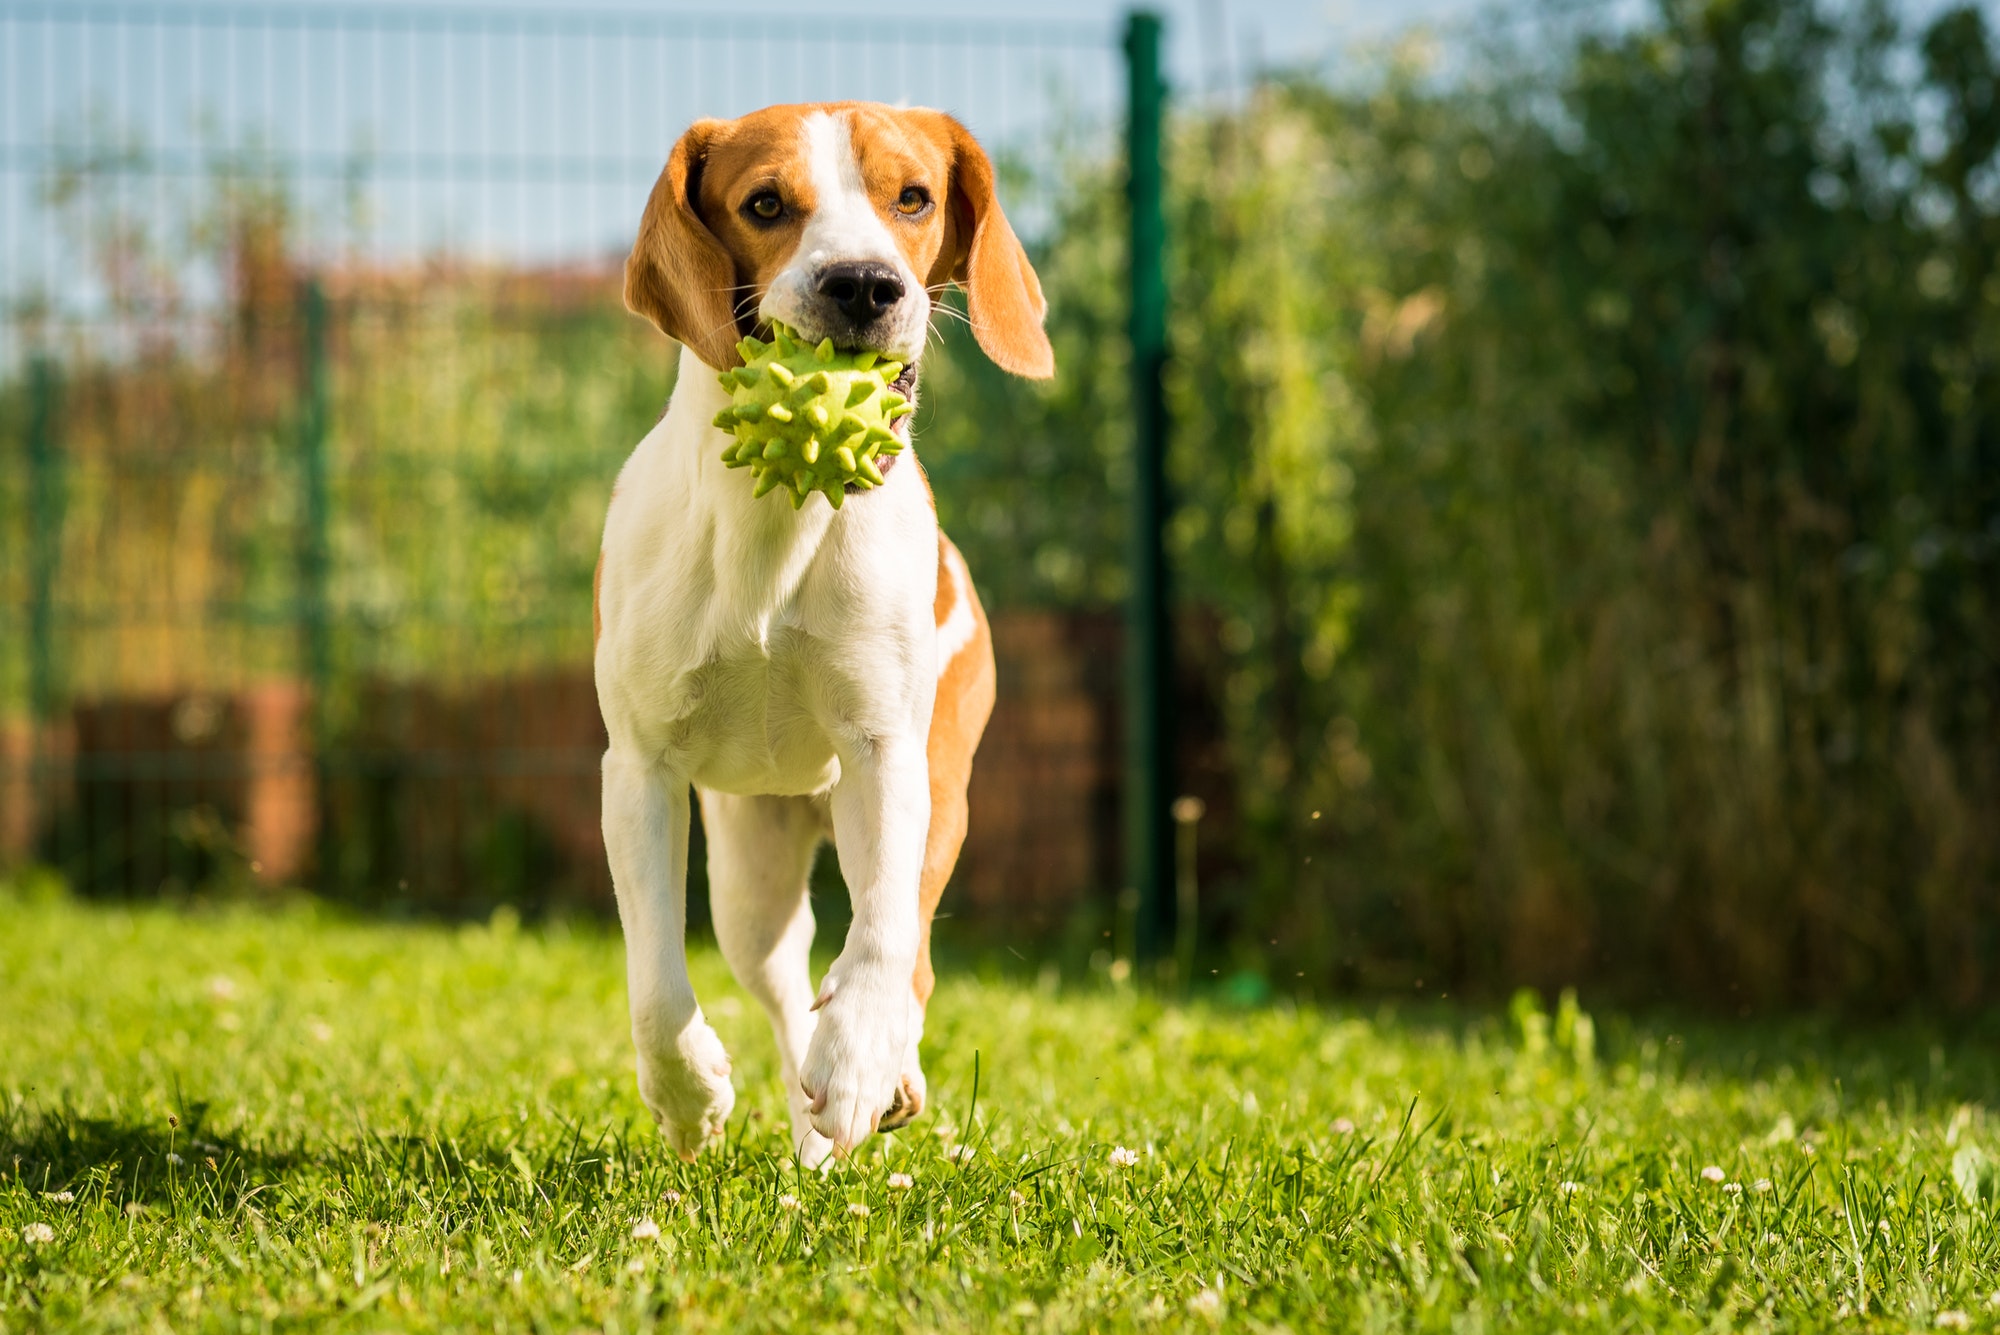 Beagle dog pet with a ball outdoors running with ball